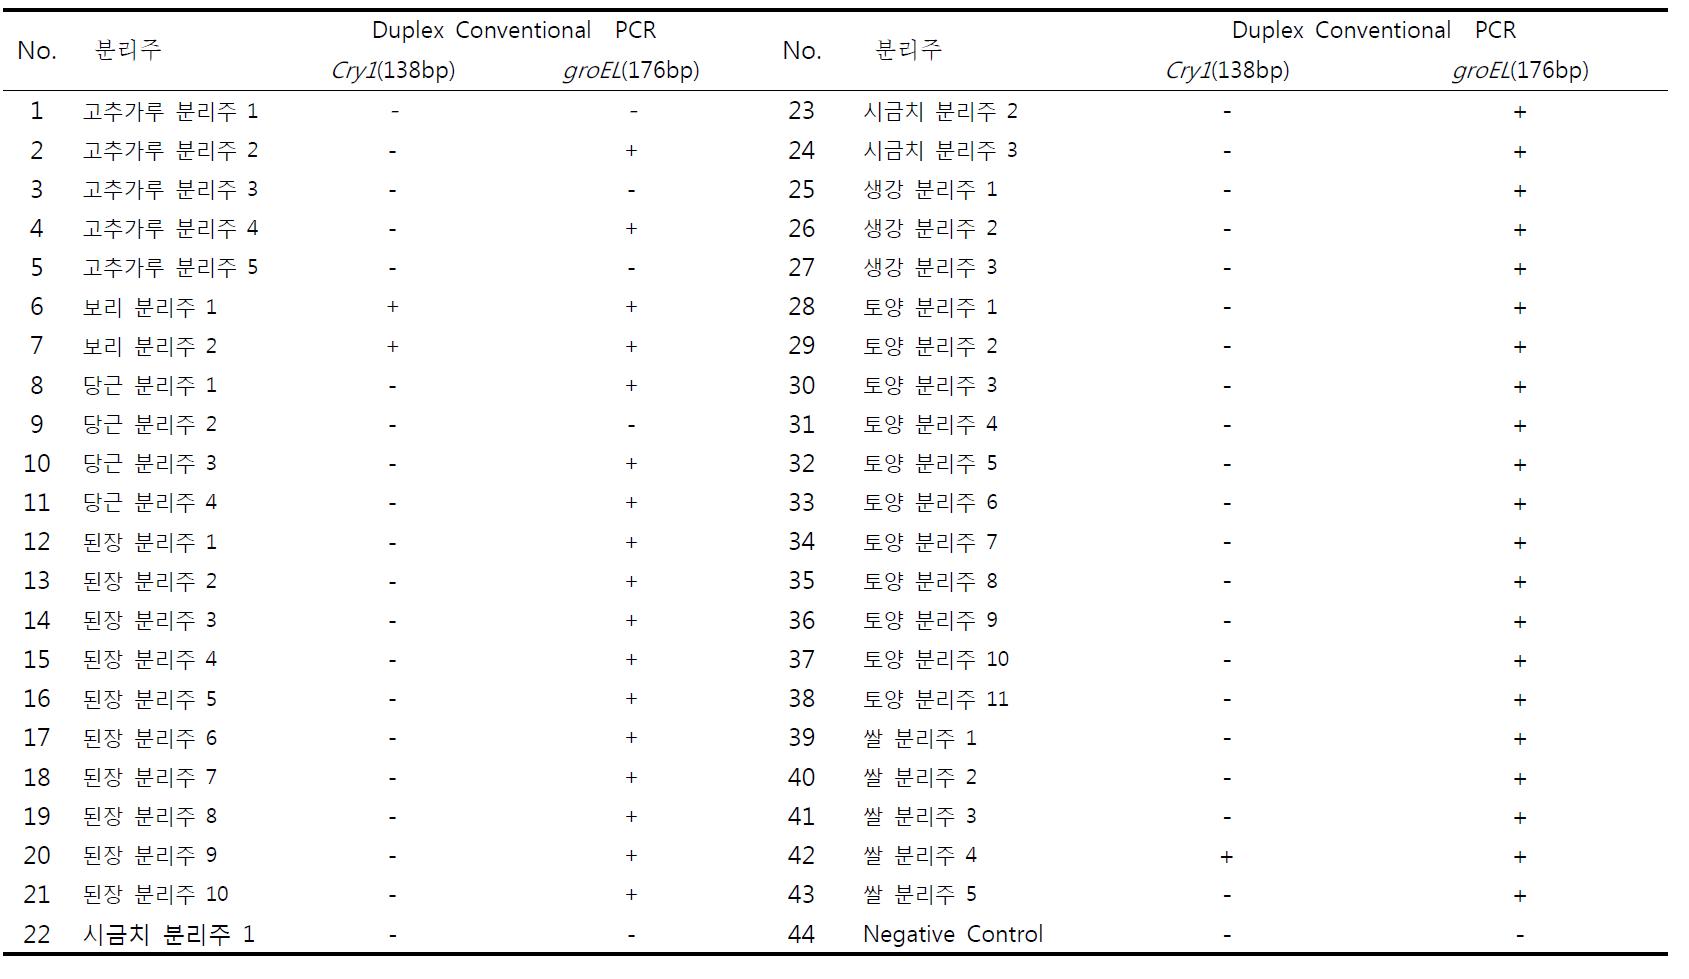 Results from Multiplex polymerase chain reaction (Multiplex PCR) analysis of B.thuringiensis and B.cereus isolates.